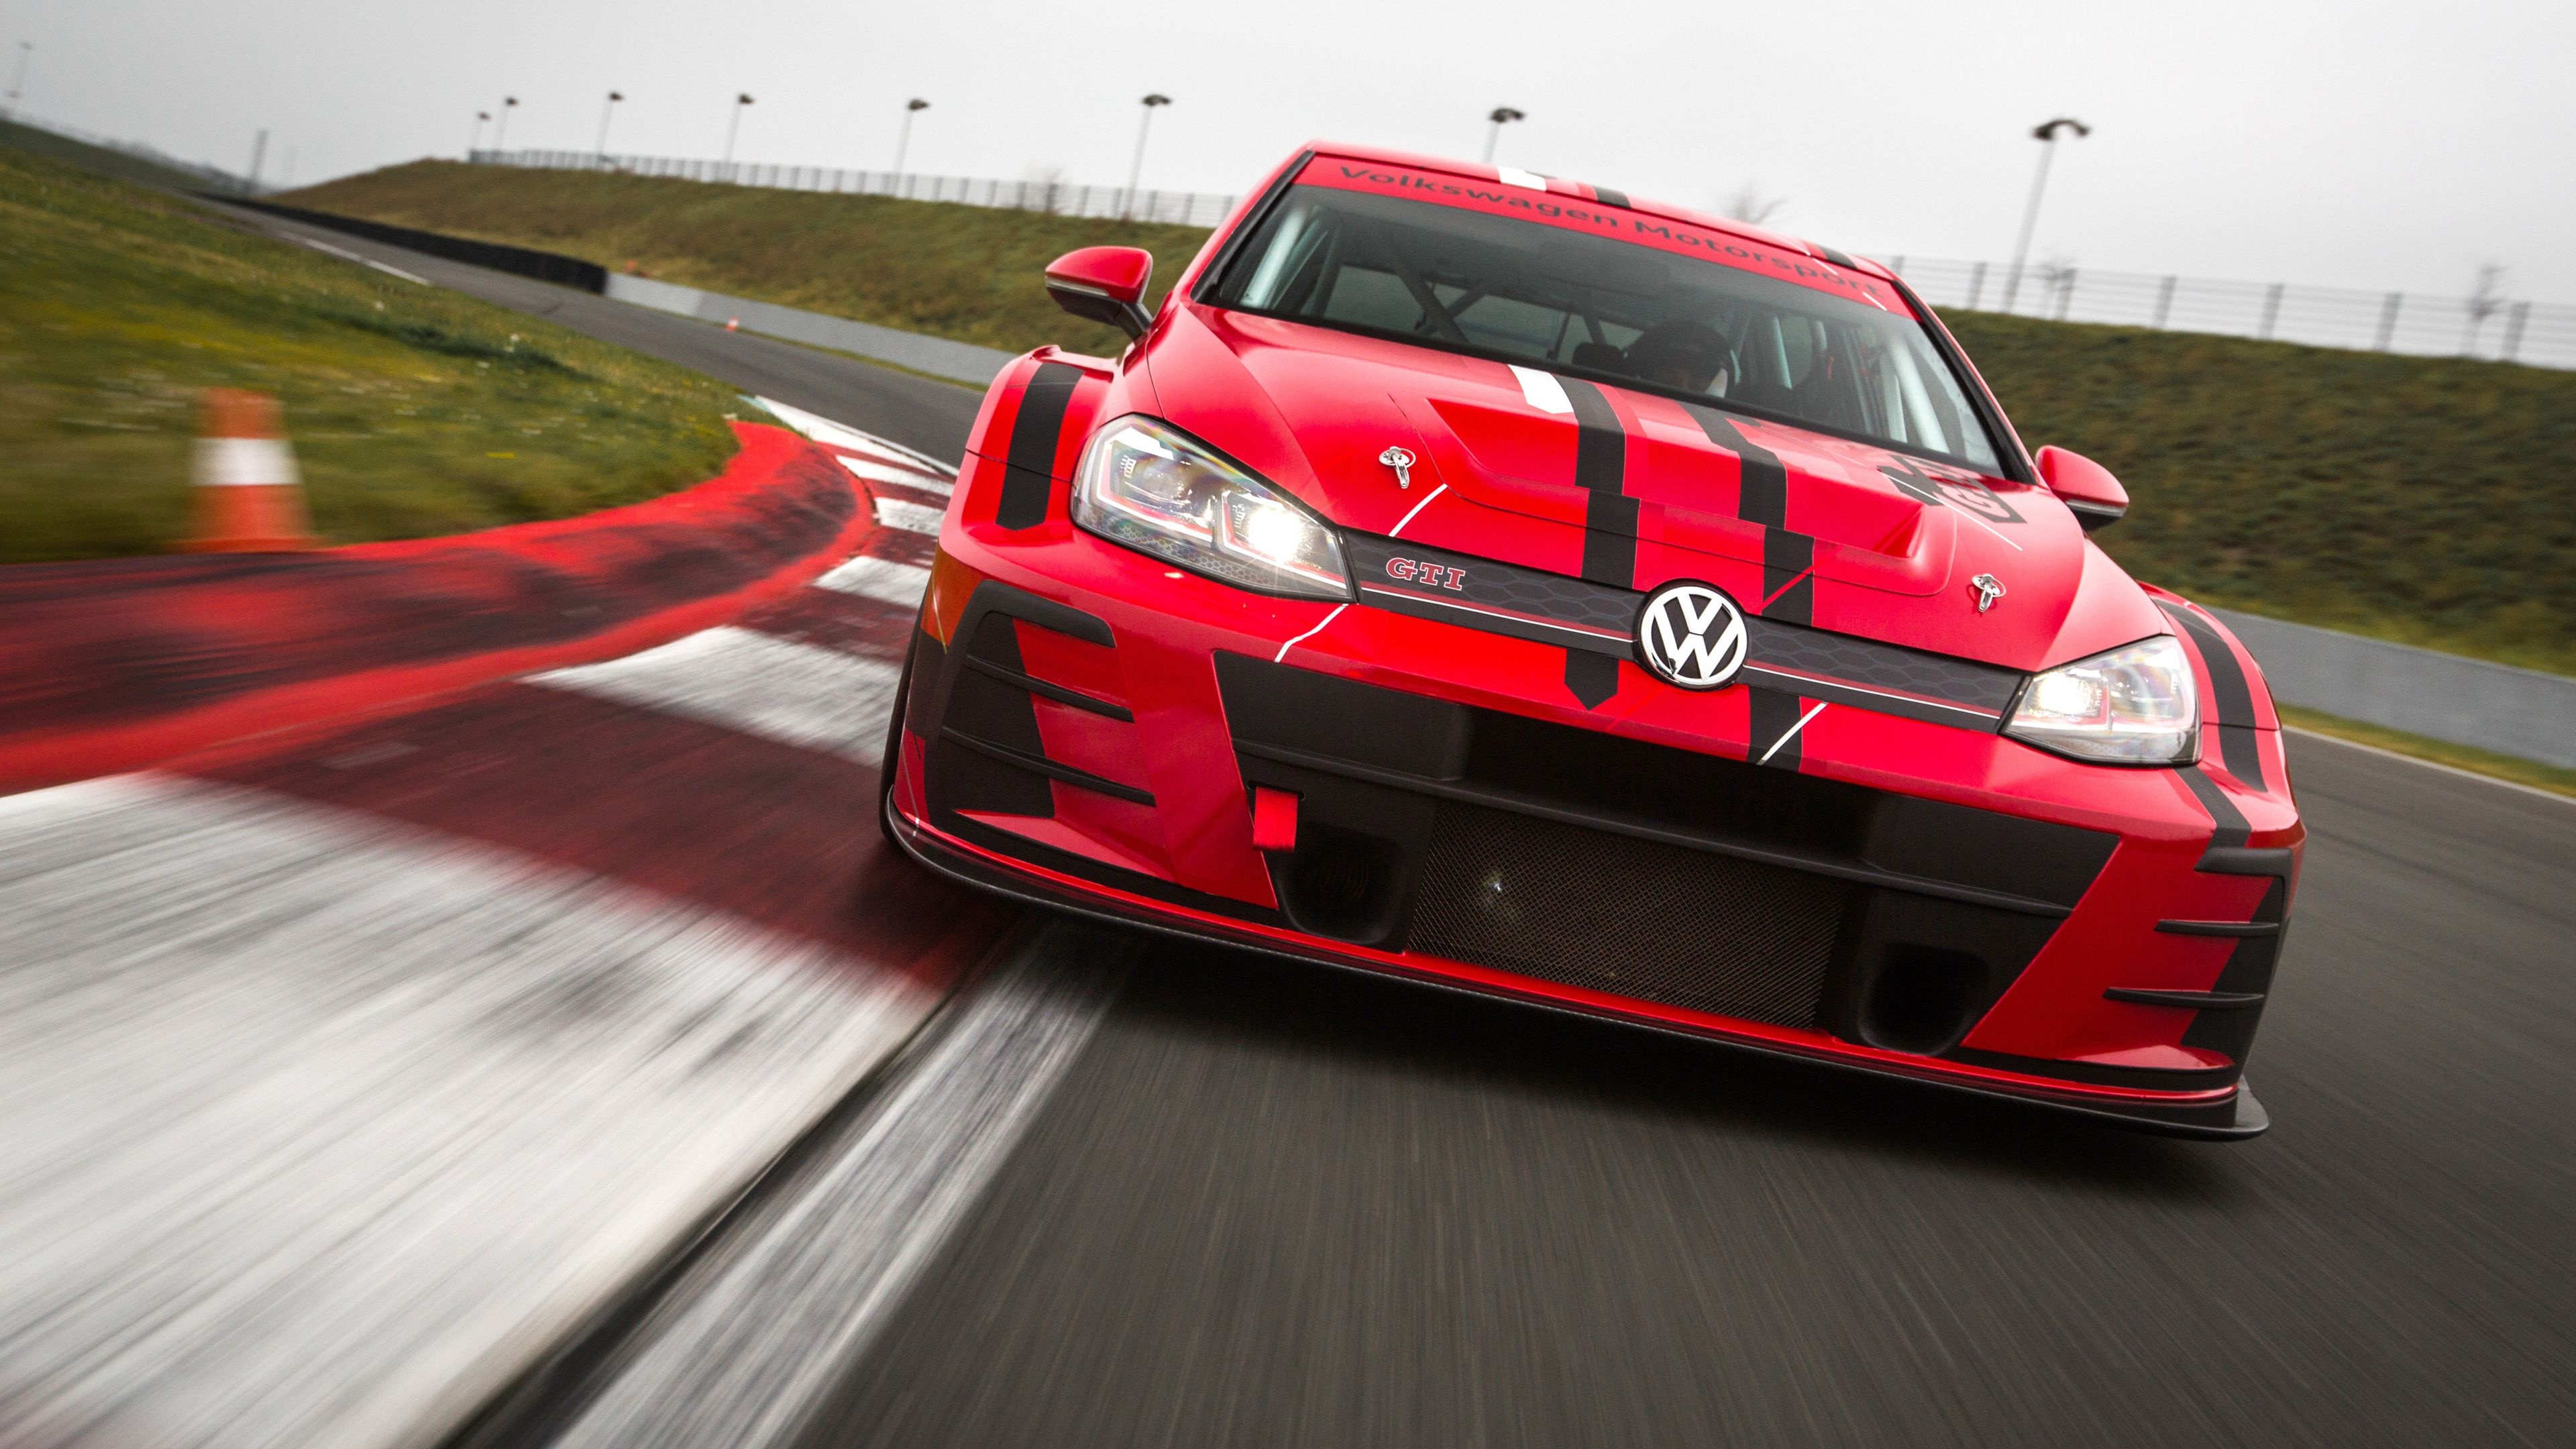 Golf GTI: 2018 Volkswagen TCR Type 5G, Race track, Motion, A hot hatch and sports car. 3840x2160 4K Wallpaper.